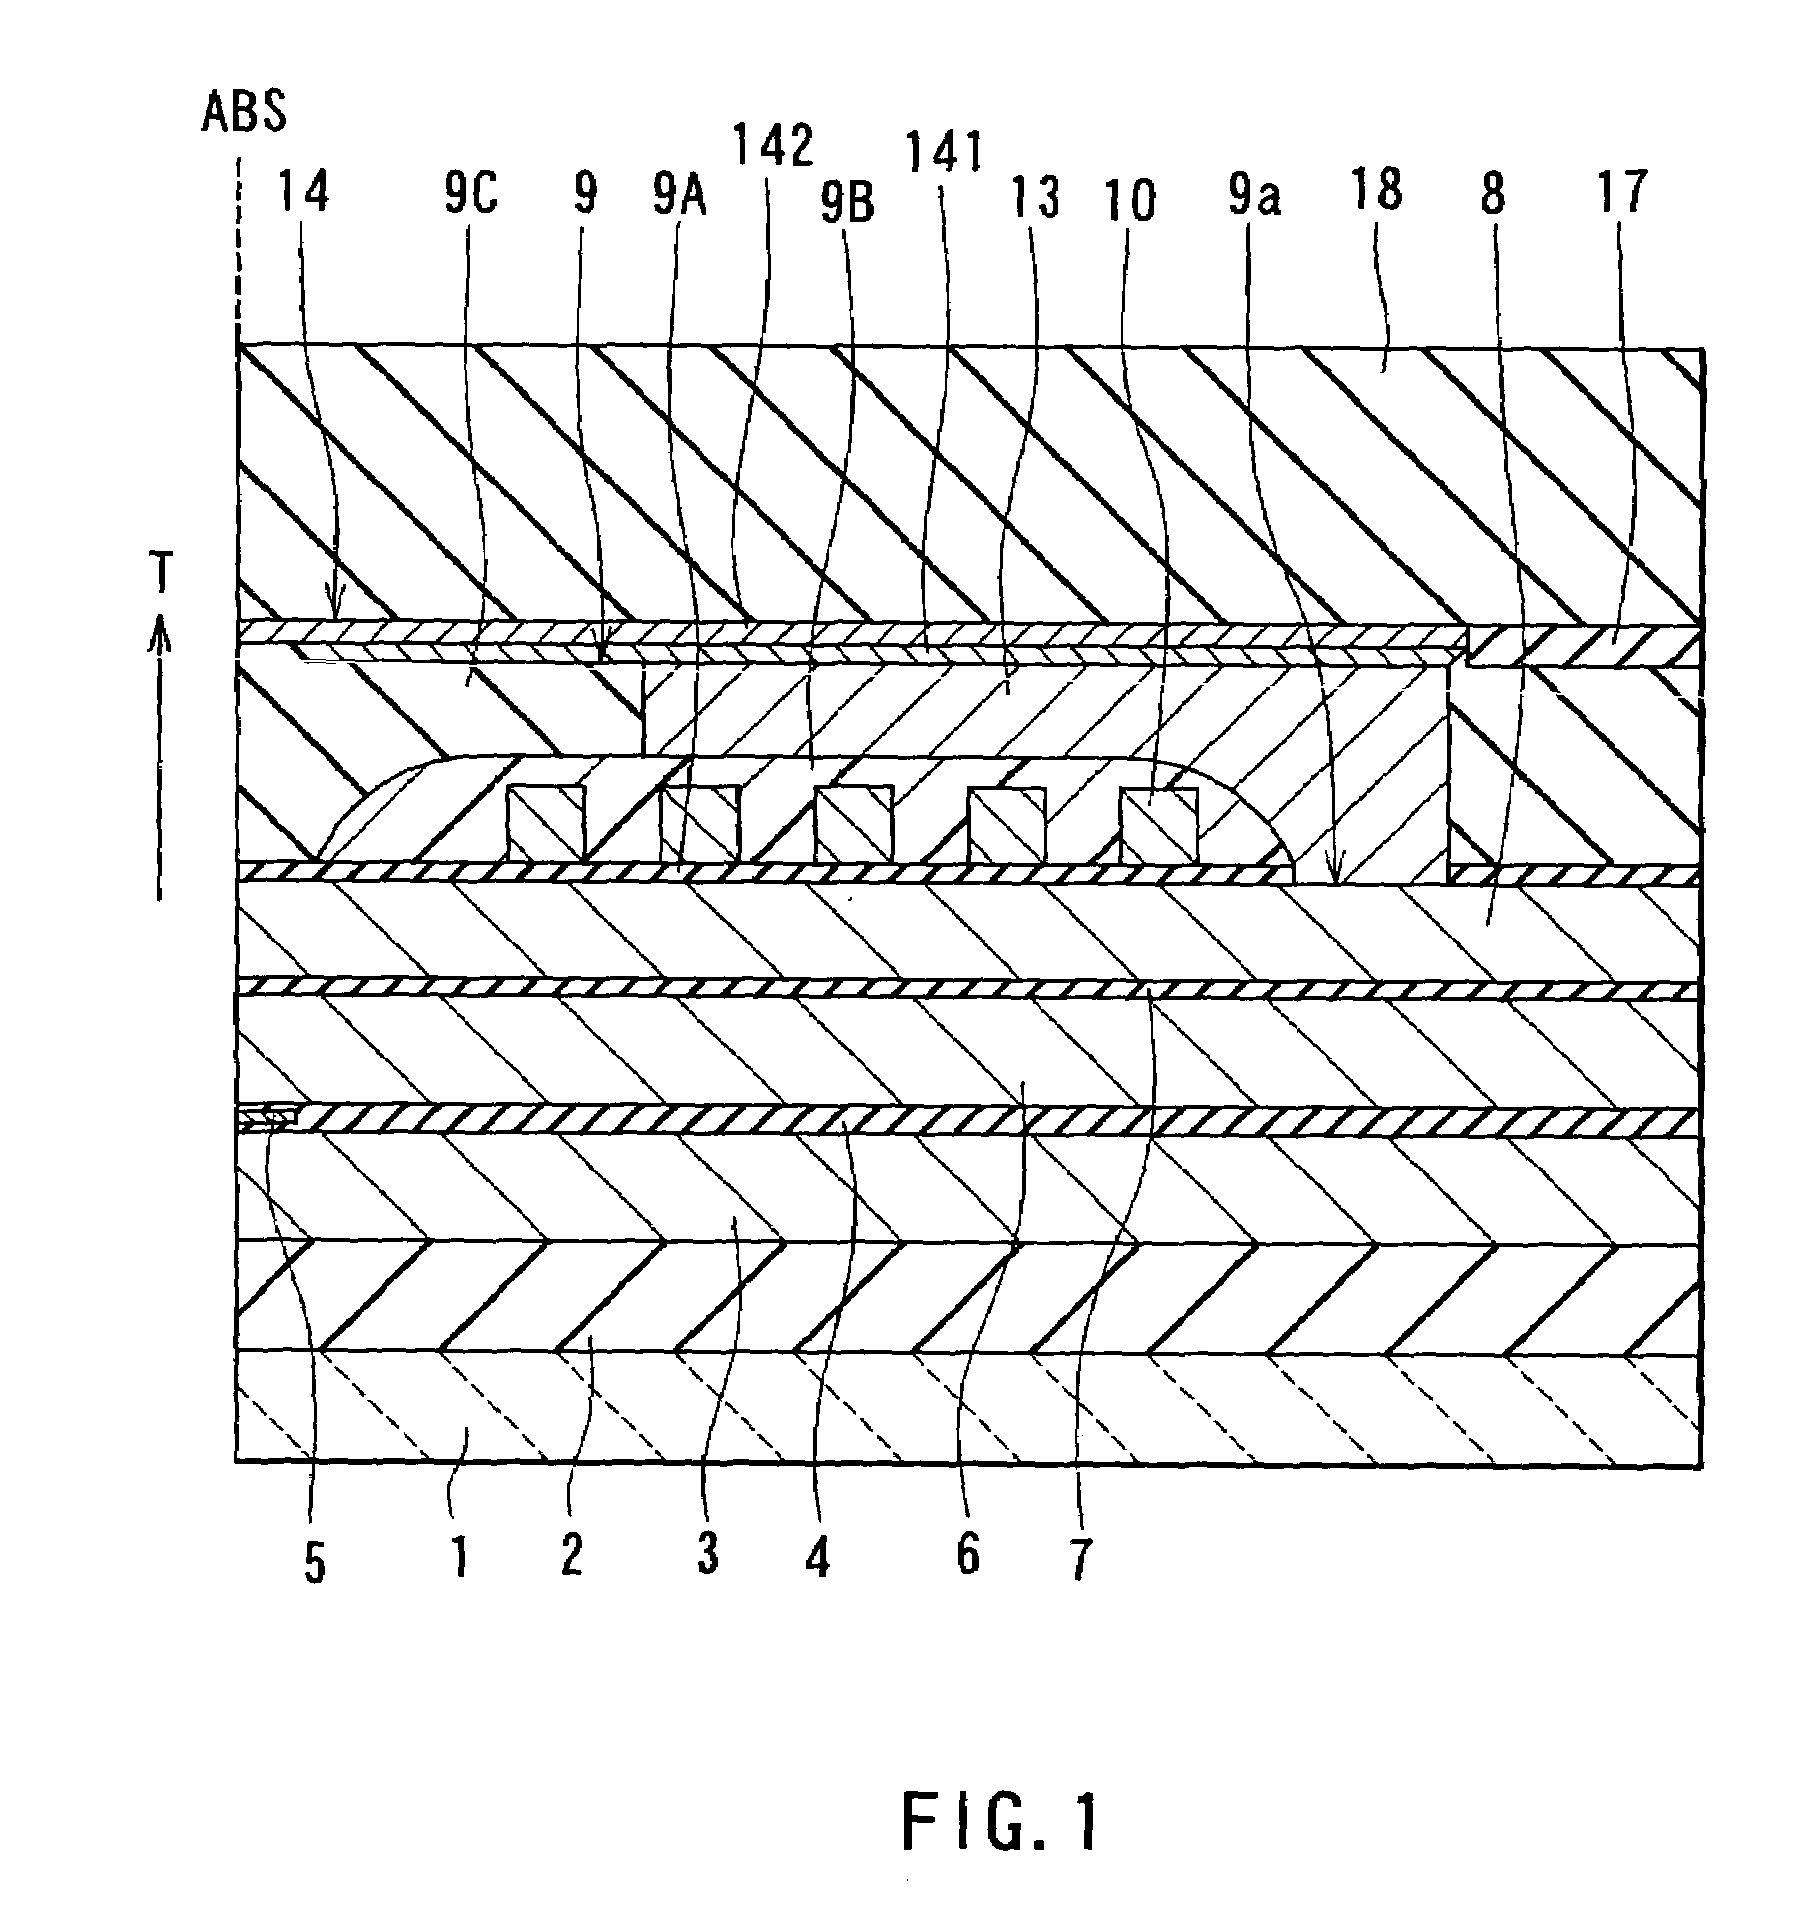 Magnetic head for vertical magnetic recording including main pole layer having varying width and thickness, head gimbal assembly, and hard disk drive